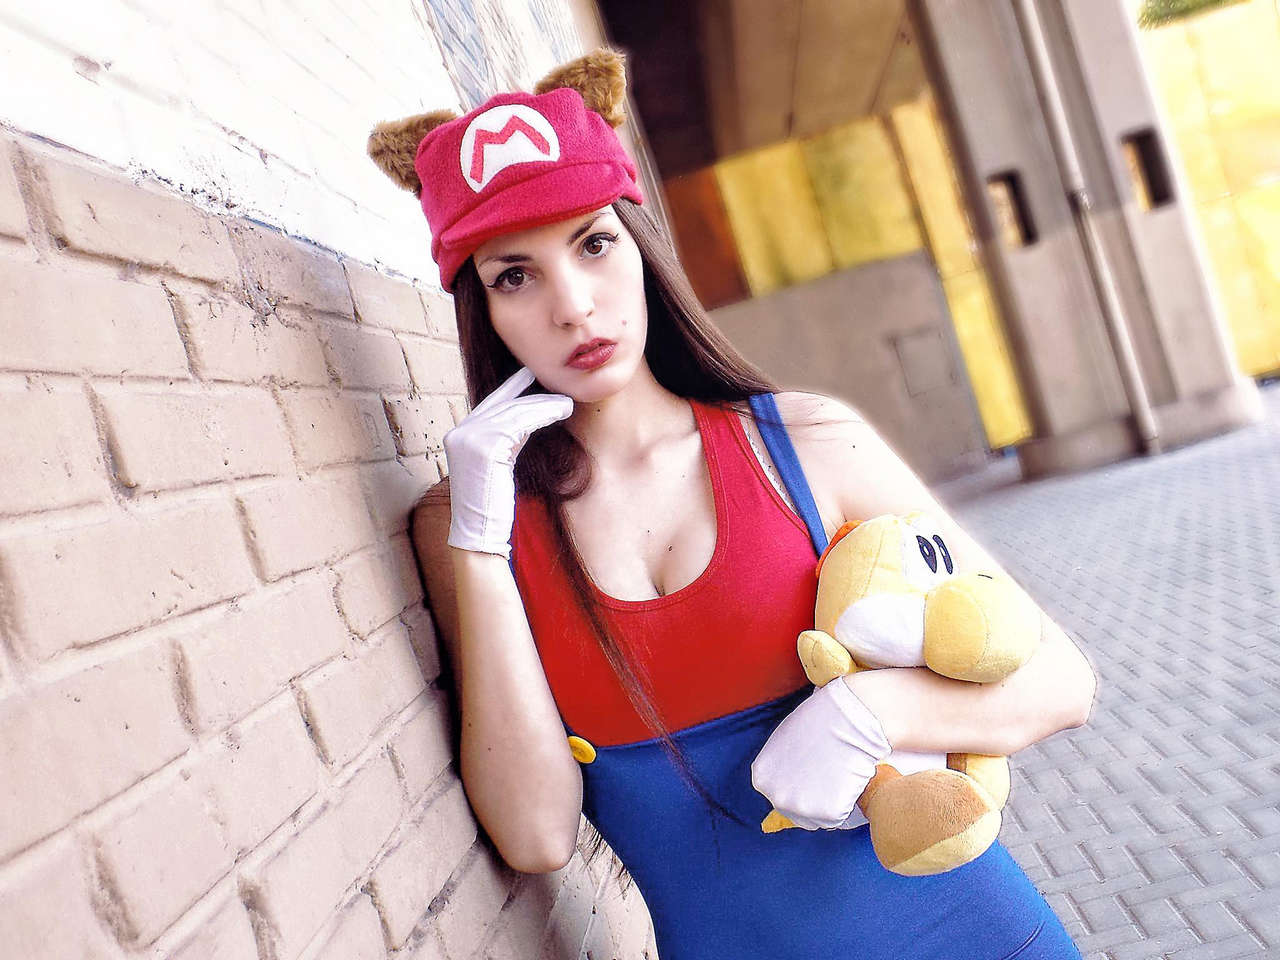 Self Mario Sm3 Is My Favourite Mario Game Ever Which One Is Yours Ragoddes